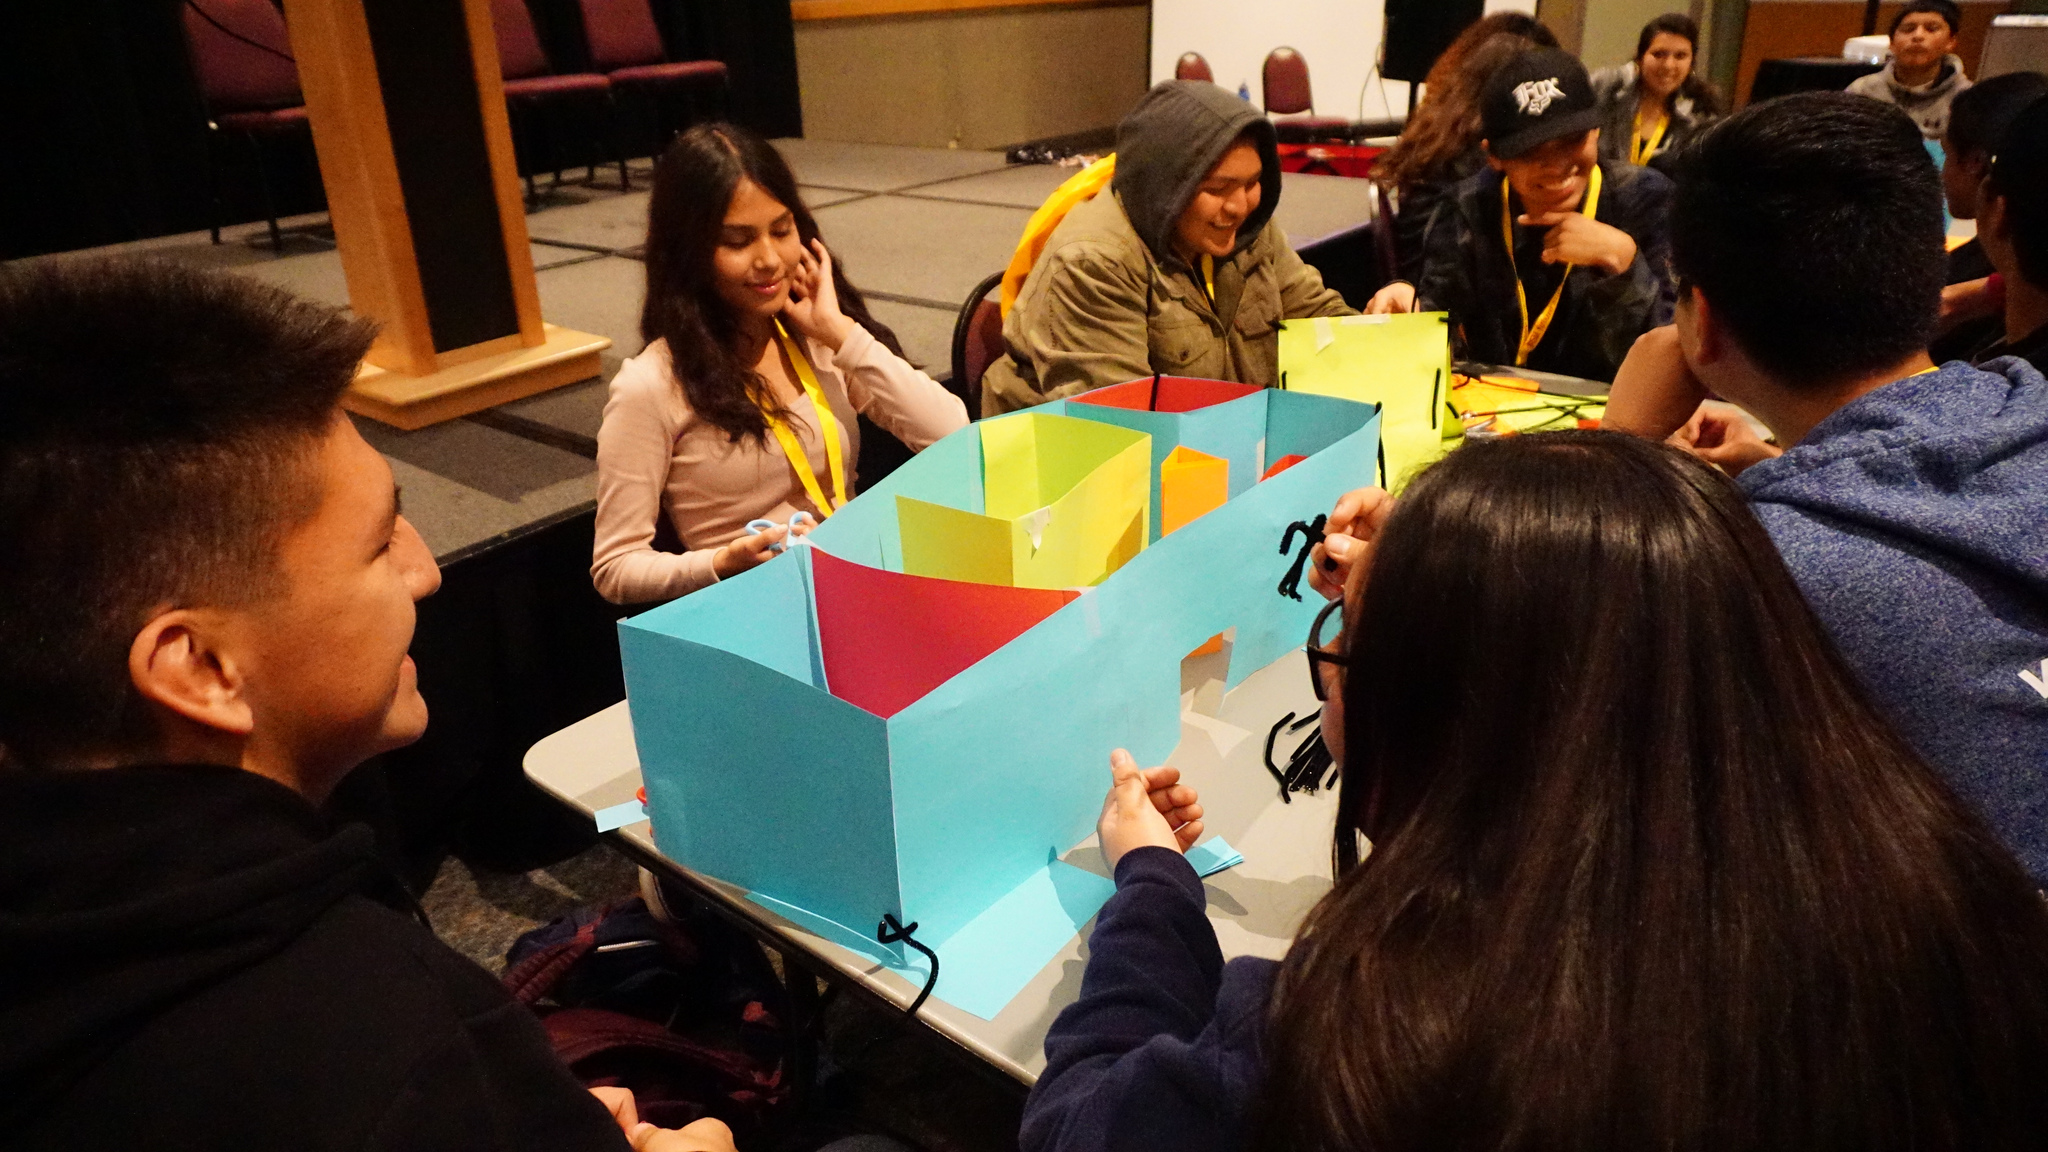 Students at RECHARGE conference participate in group activity